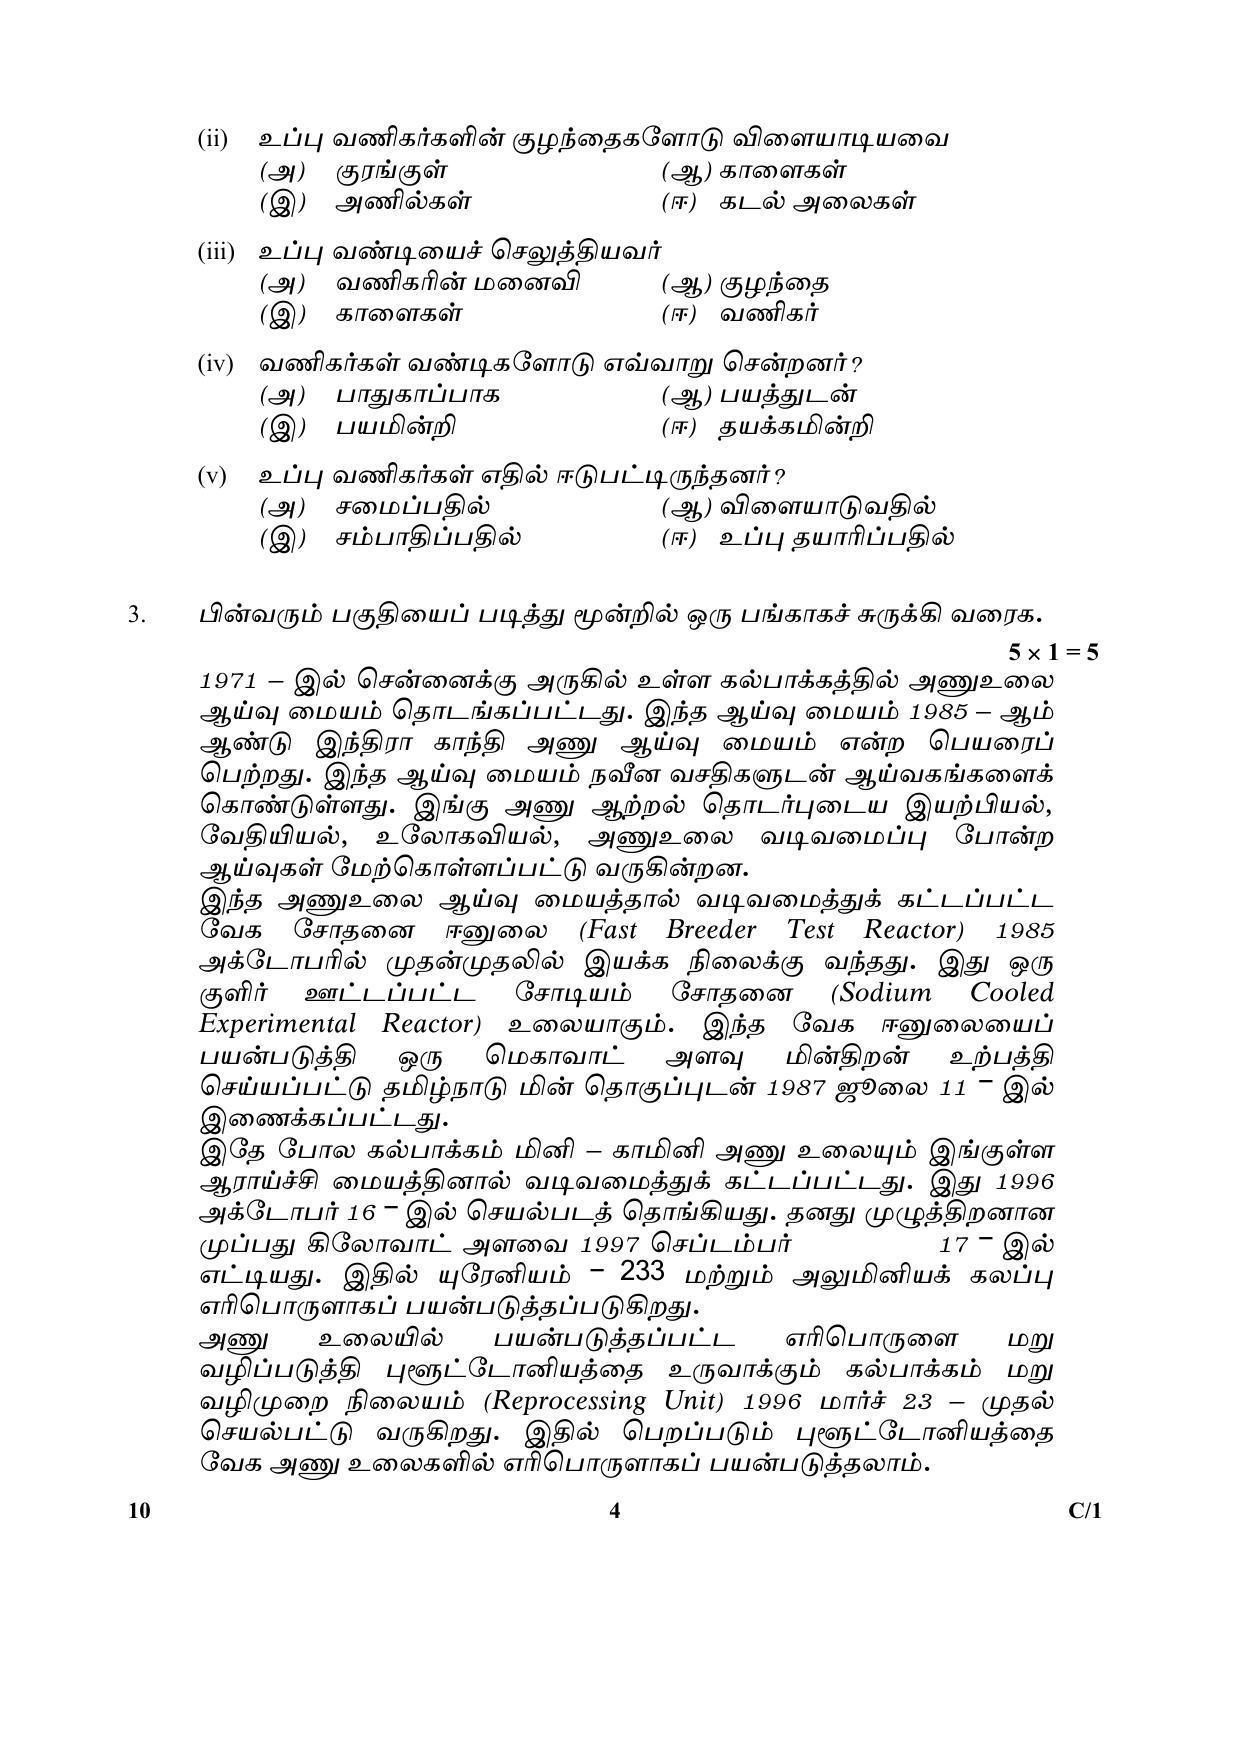 CBSE Class 10 10 (Tamil) 2018 Compartment Question Paper - Page 4